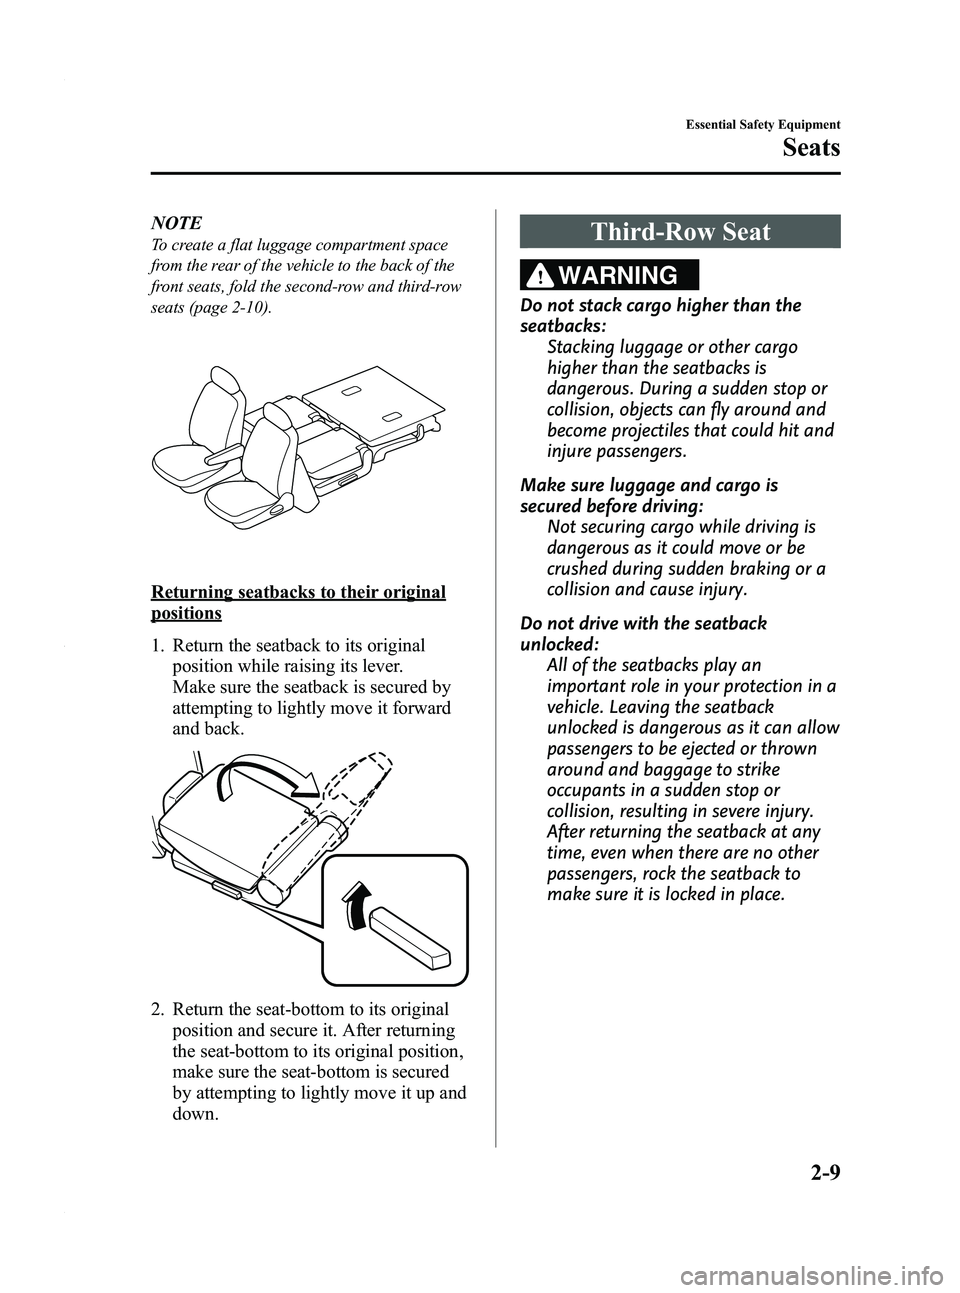 MAZDA MODEL 5 2010 Owners Manual Black plate (21,1)
NOTE
To create a flat luggage compartment space
from the rear of the vehicle to the back of the
front seats, fold the second-row and third-row
seats (page 2-10).
Returning seatbacks